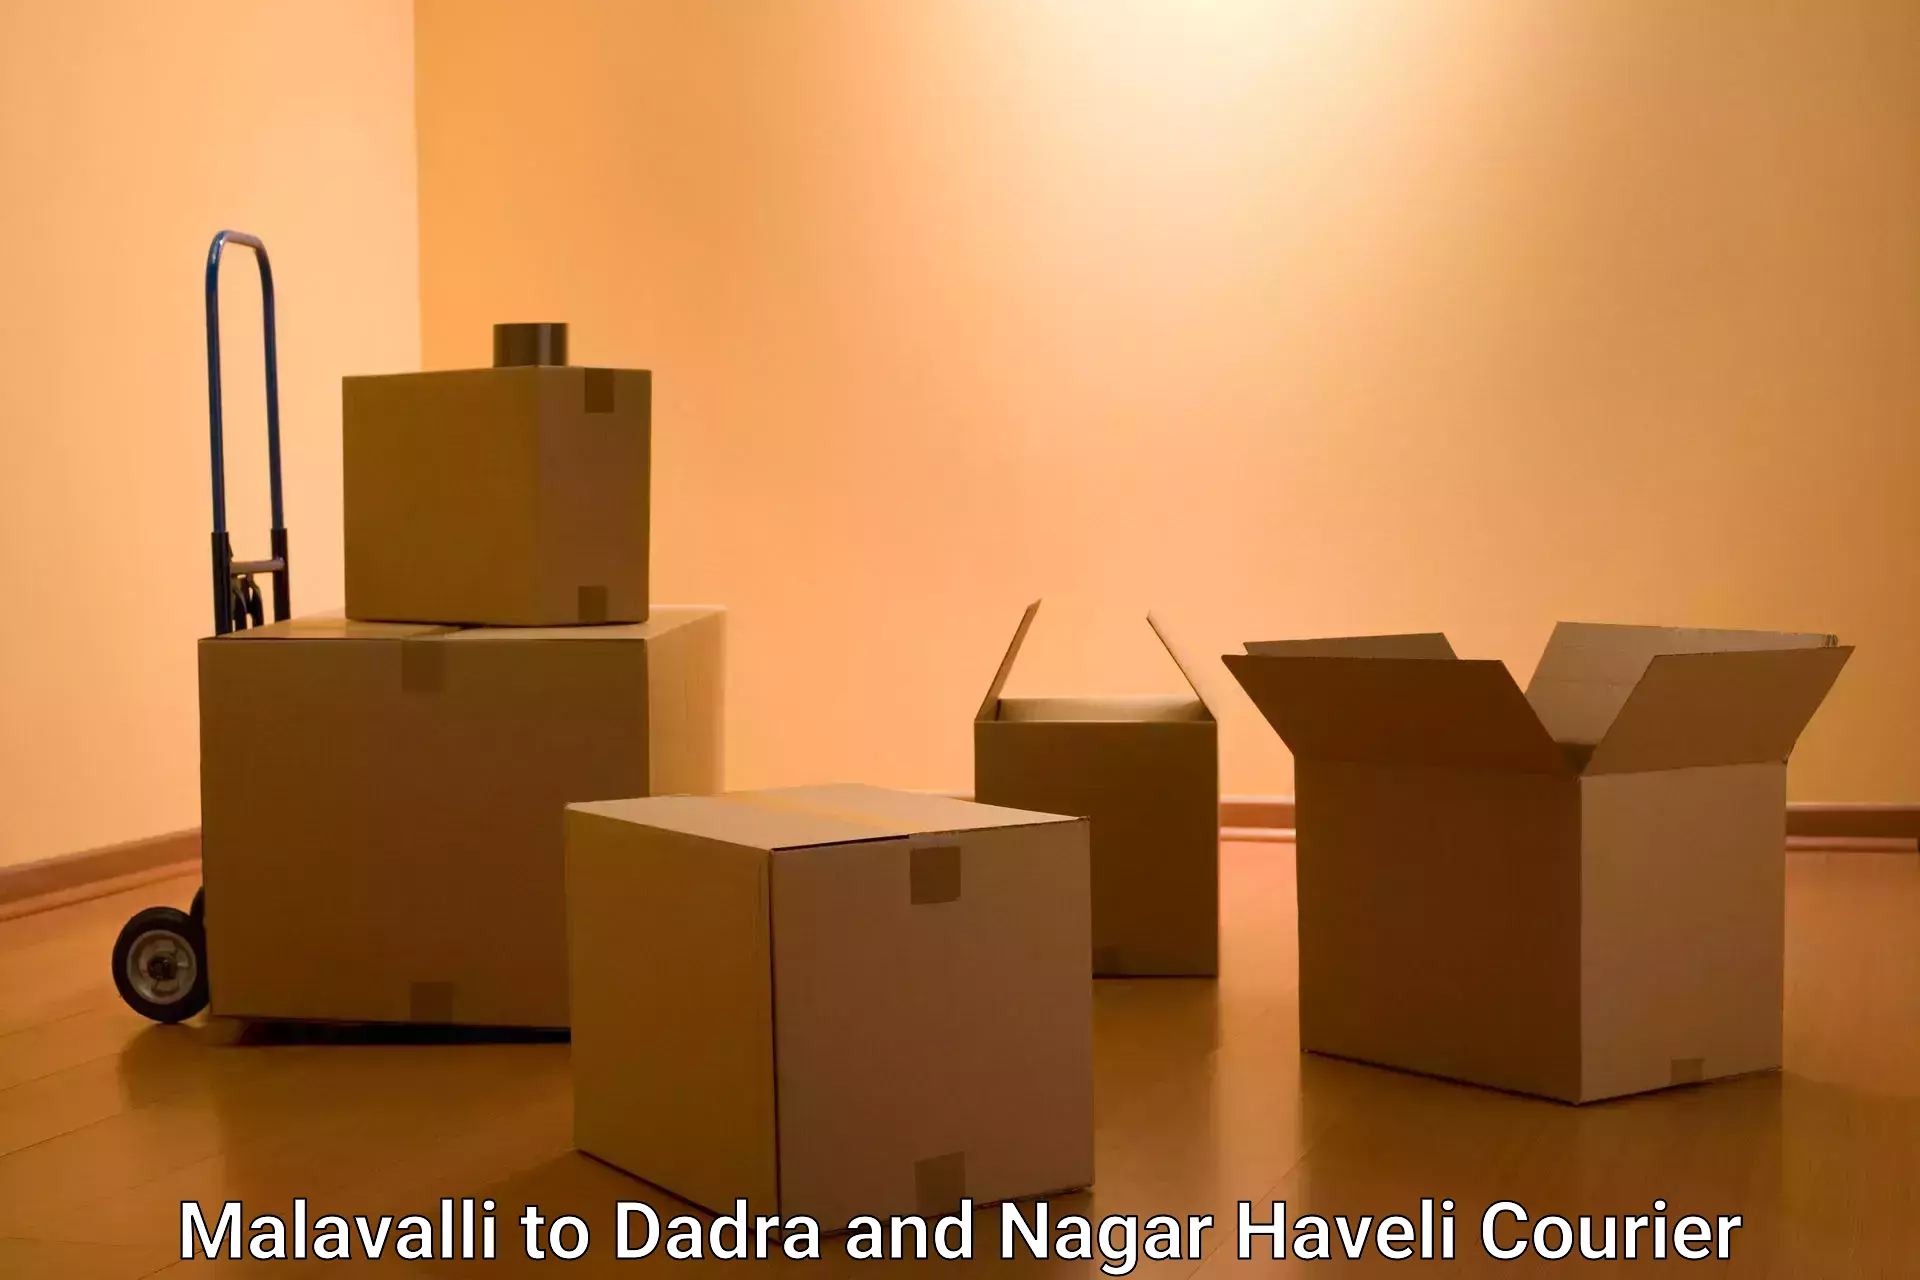 Multi-national courier services Malavalli to Dadra and Nagar Haveli